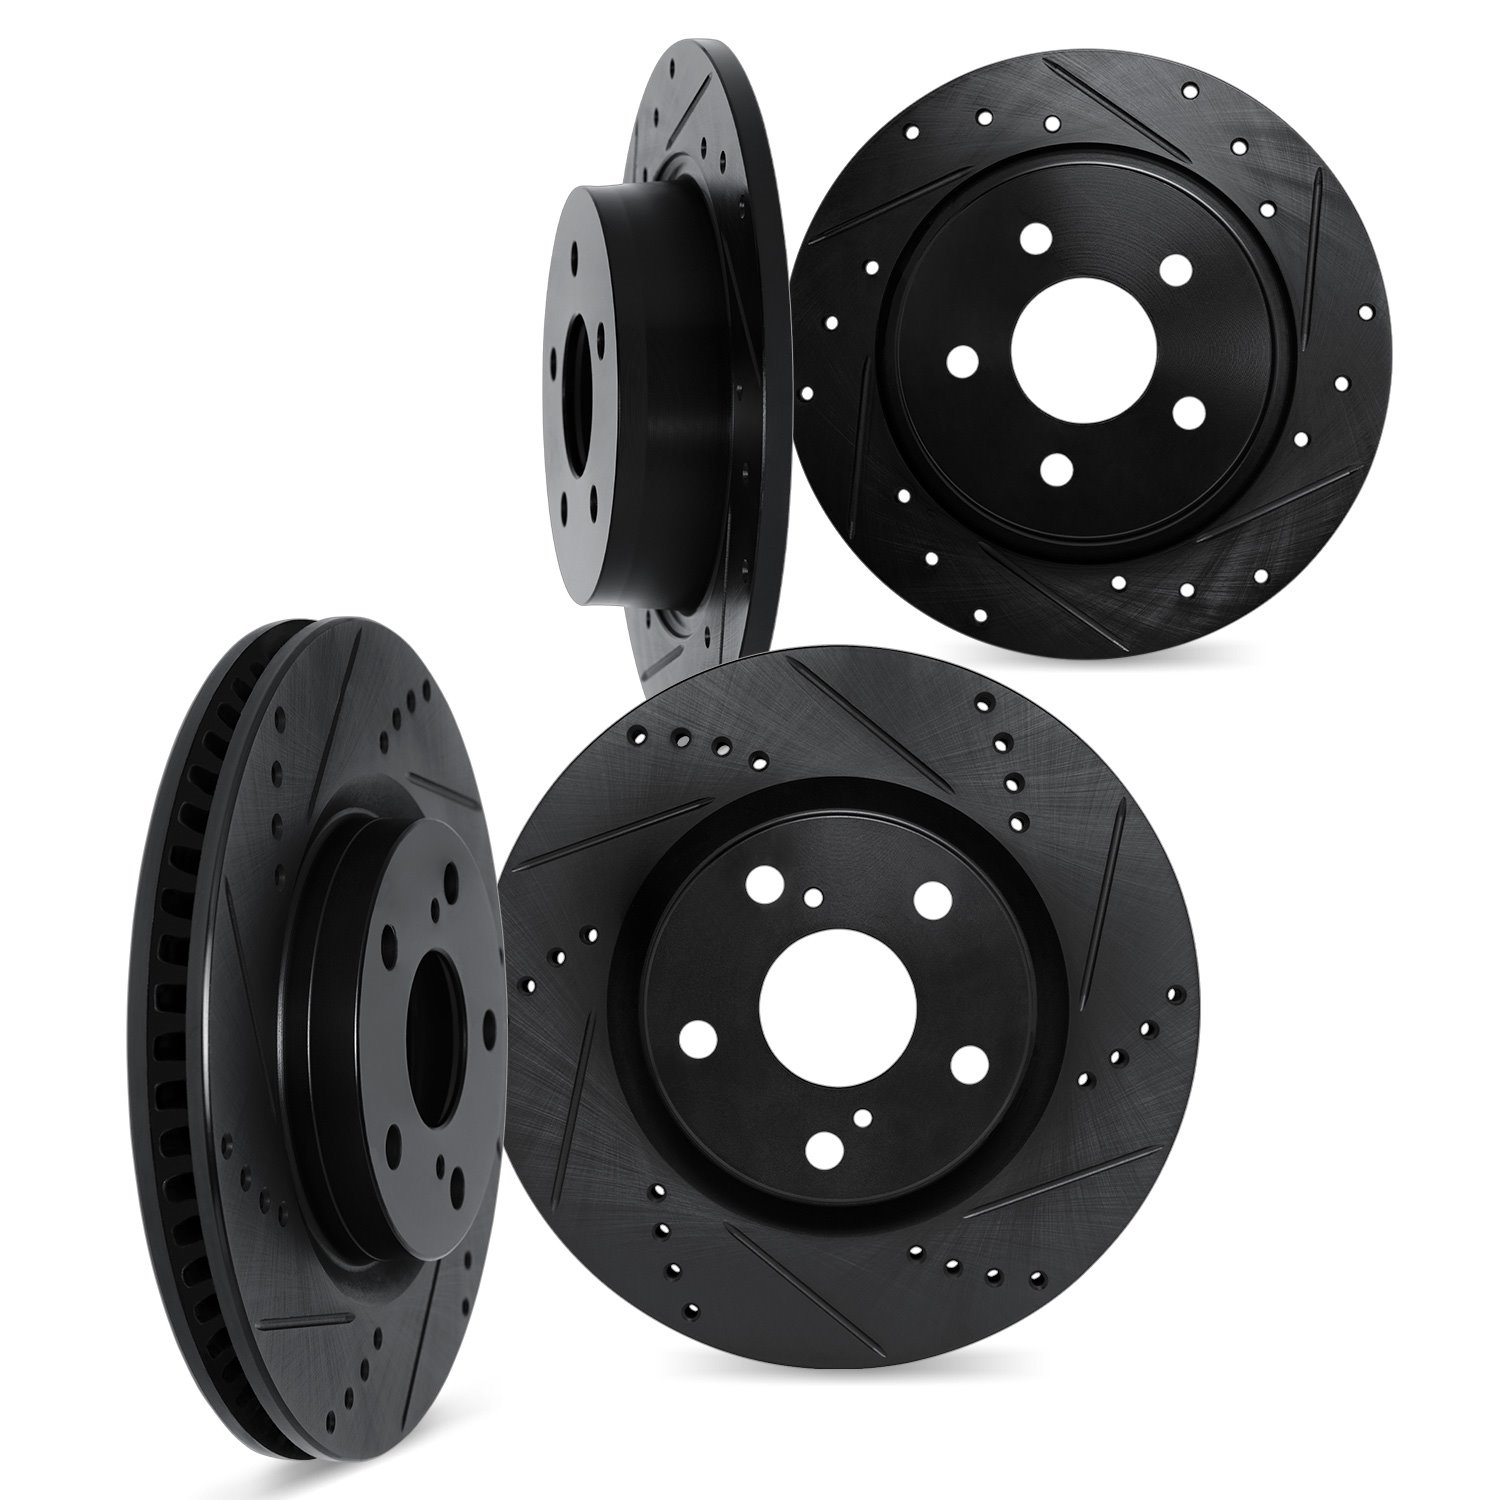 8004-76137 Drilled/Slotted Brake Rotors [Black], Fits Select Lexus/Toyota/Scion, Position: Front and Rear